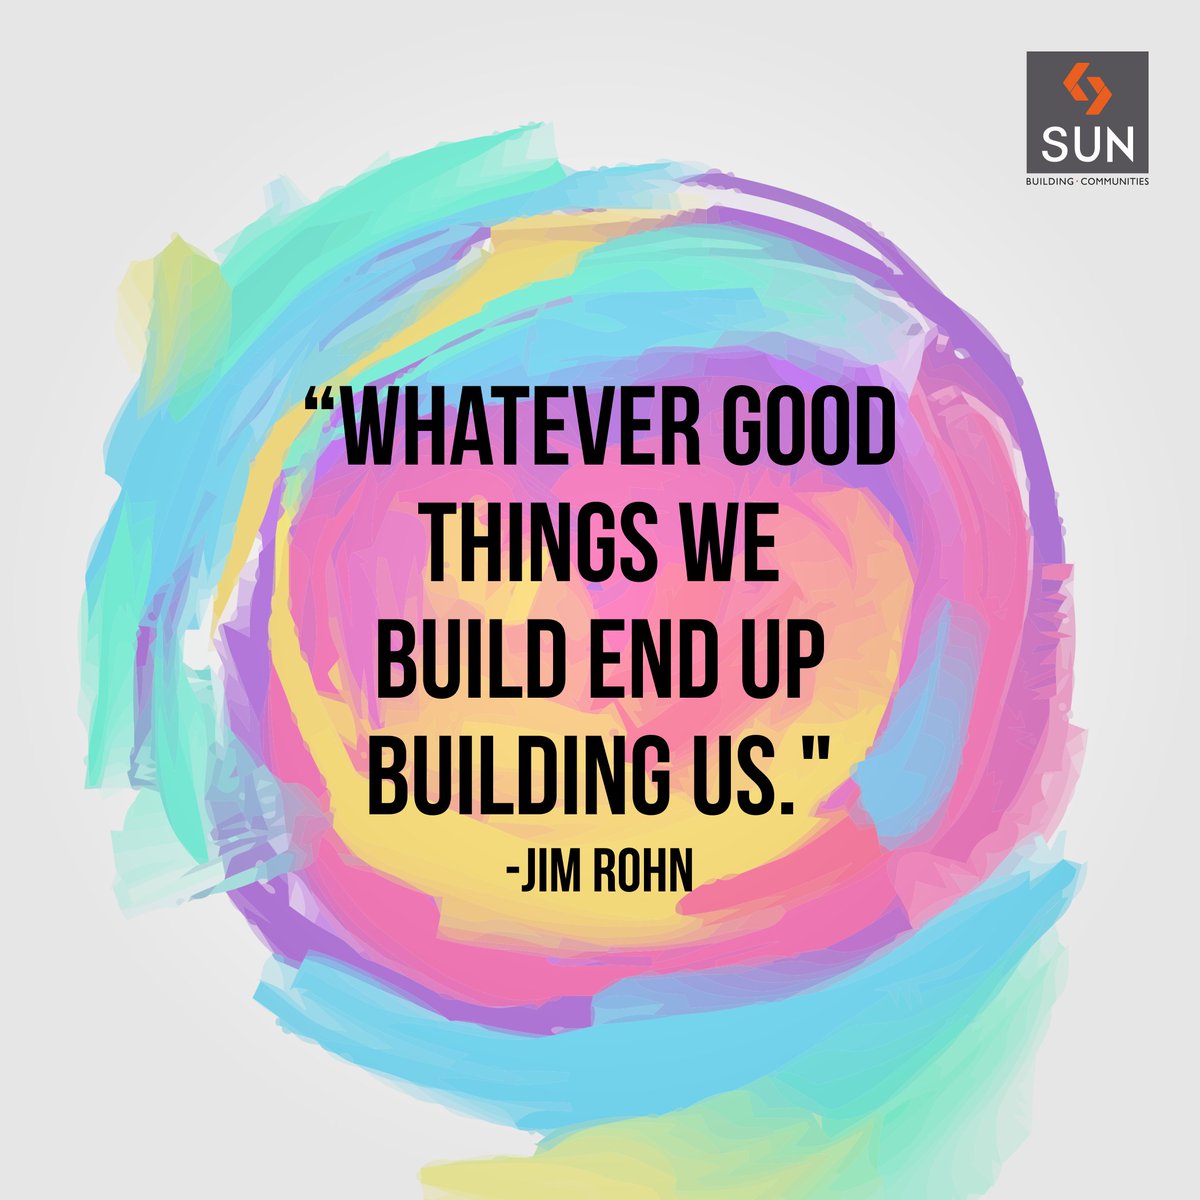 We believe in building our projects with innovations that help us win hearts of customers. #SunBuildersGroup https://t.co/u4CMG6padZ